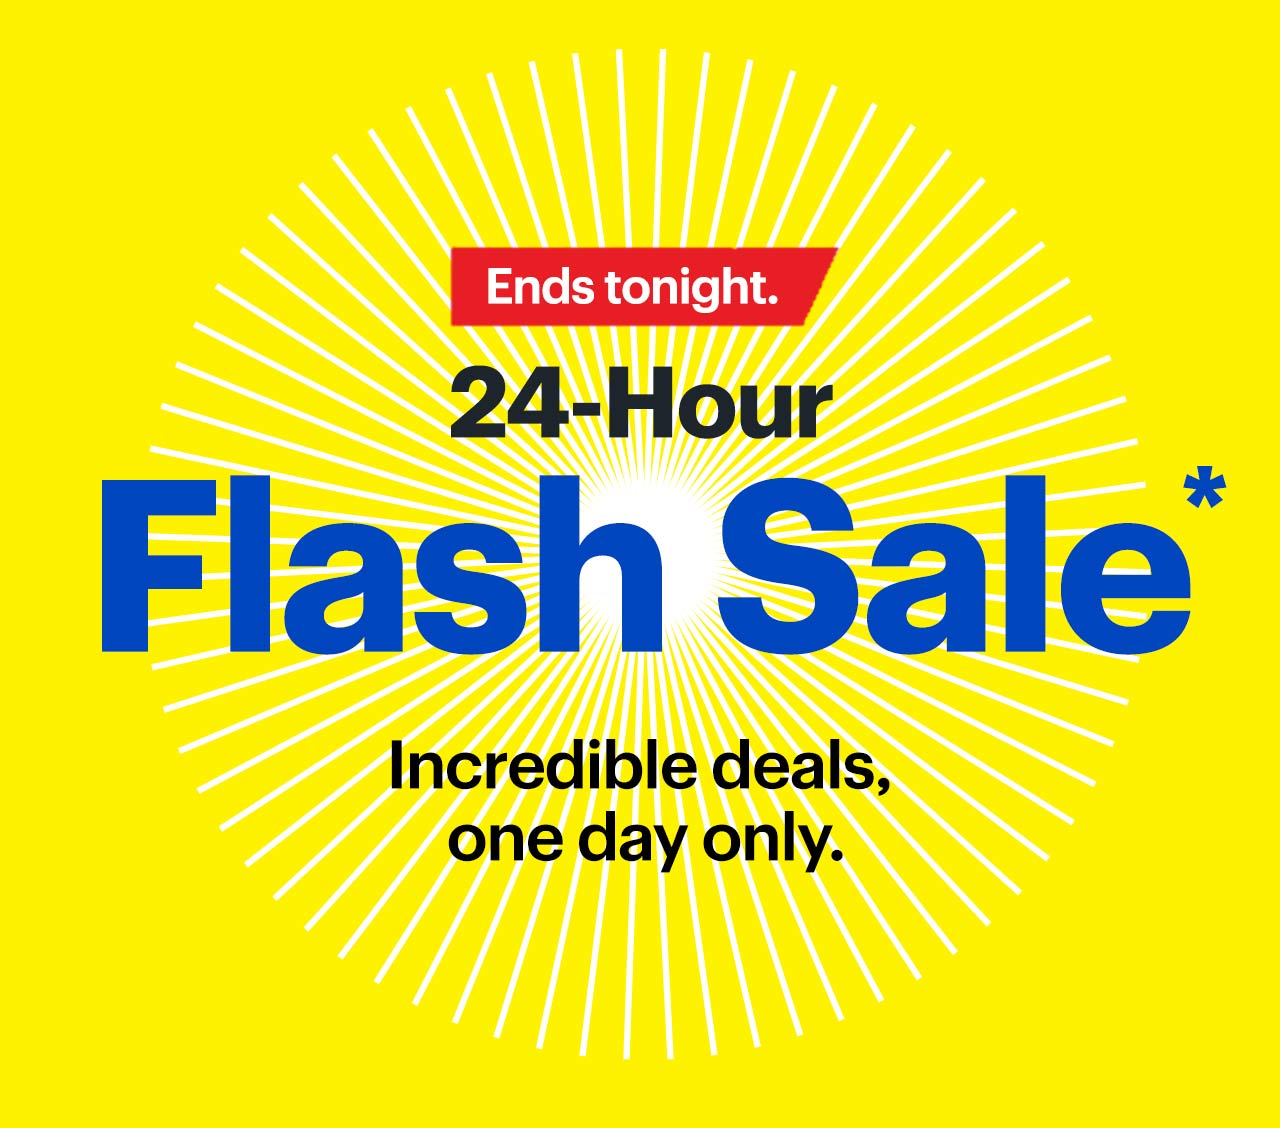 24-Hour Flash Sale. Ends tonight. Incredible deals, one day only. Shop now. Reference disclaimer.